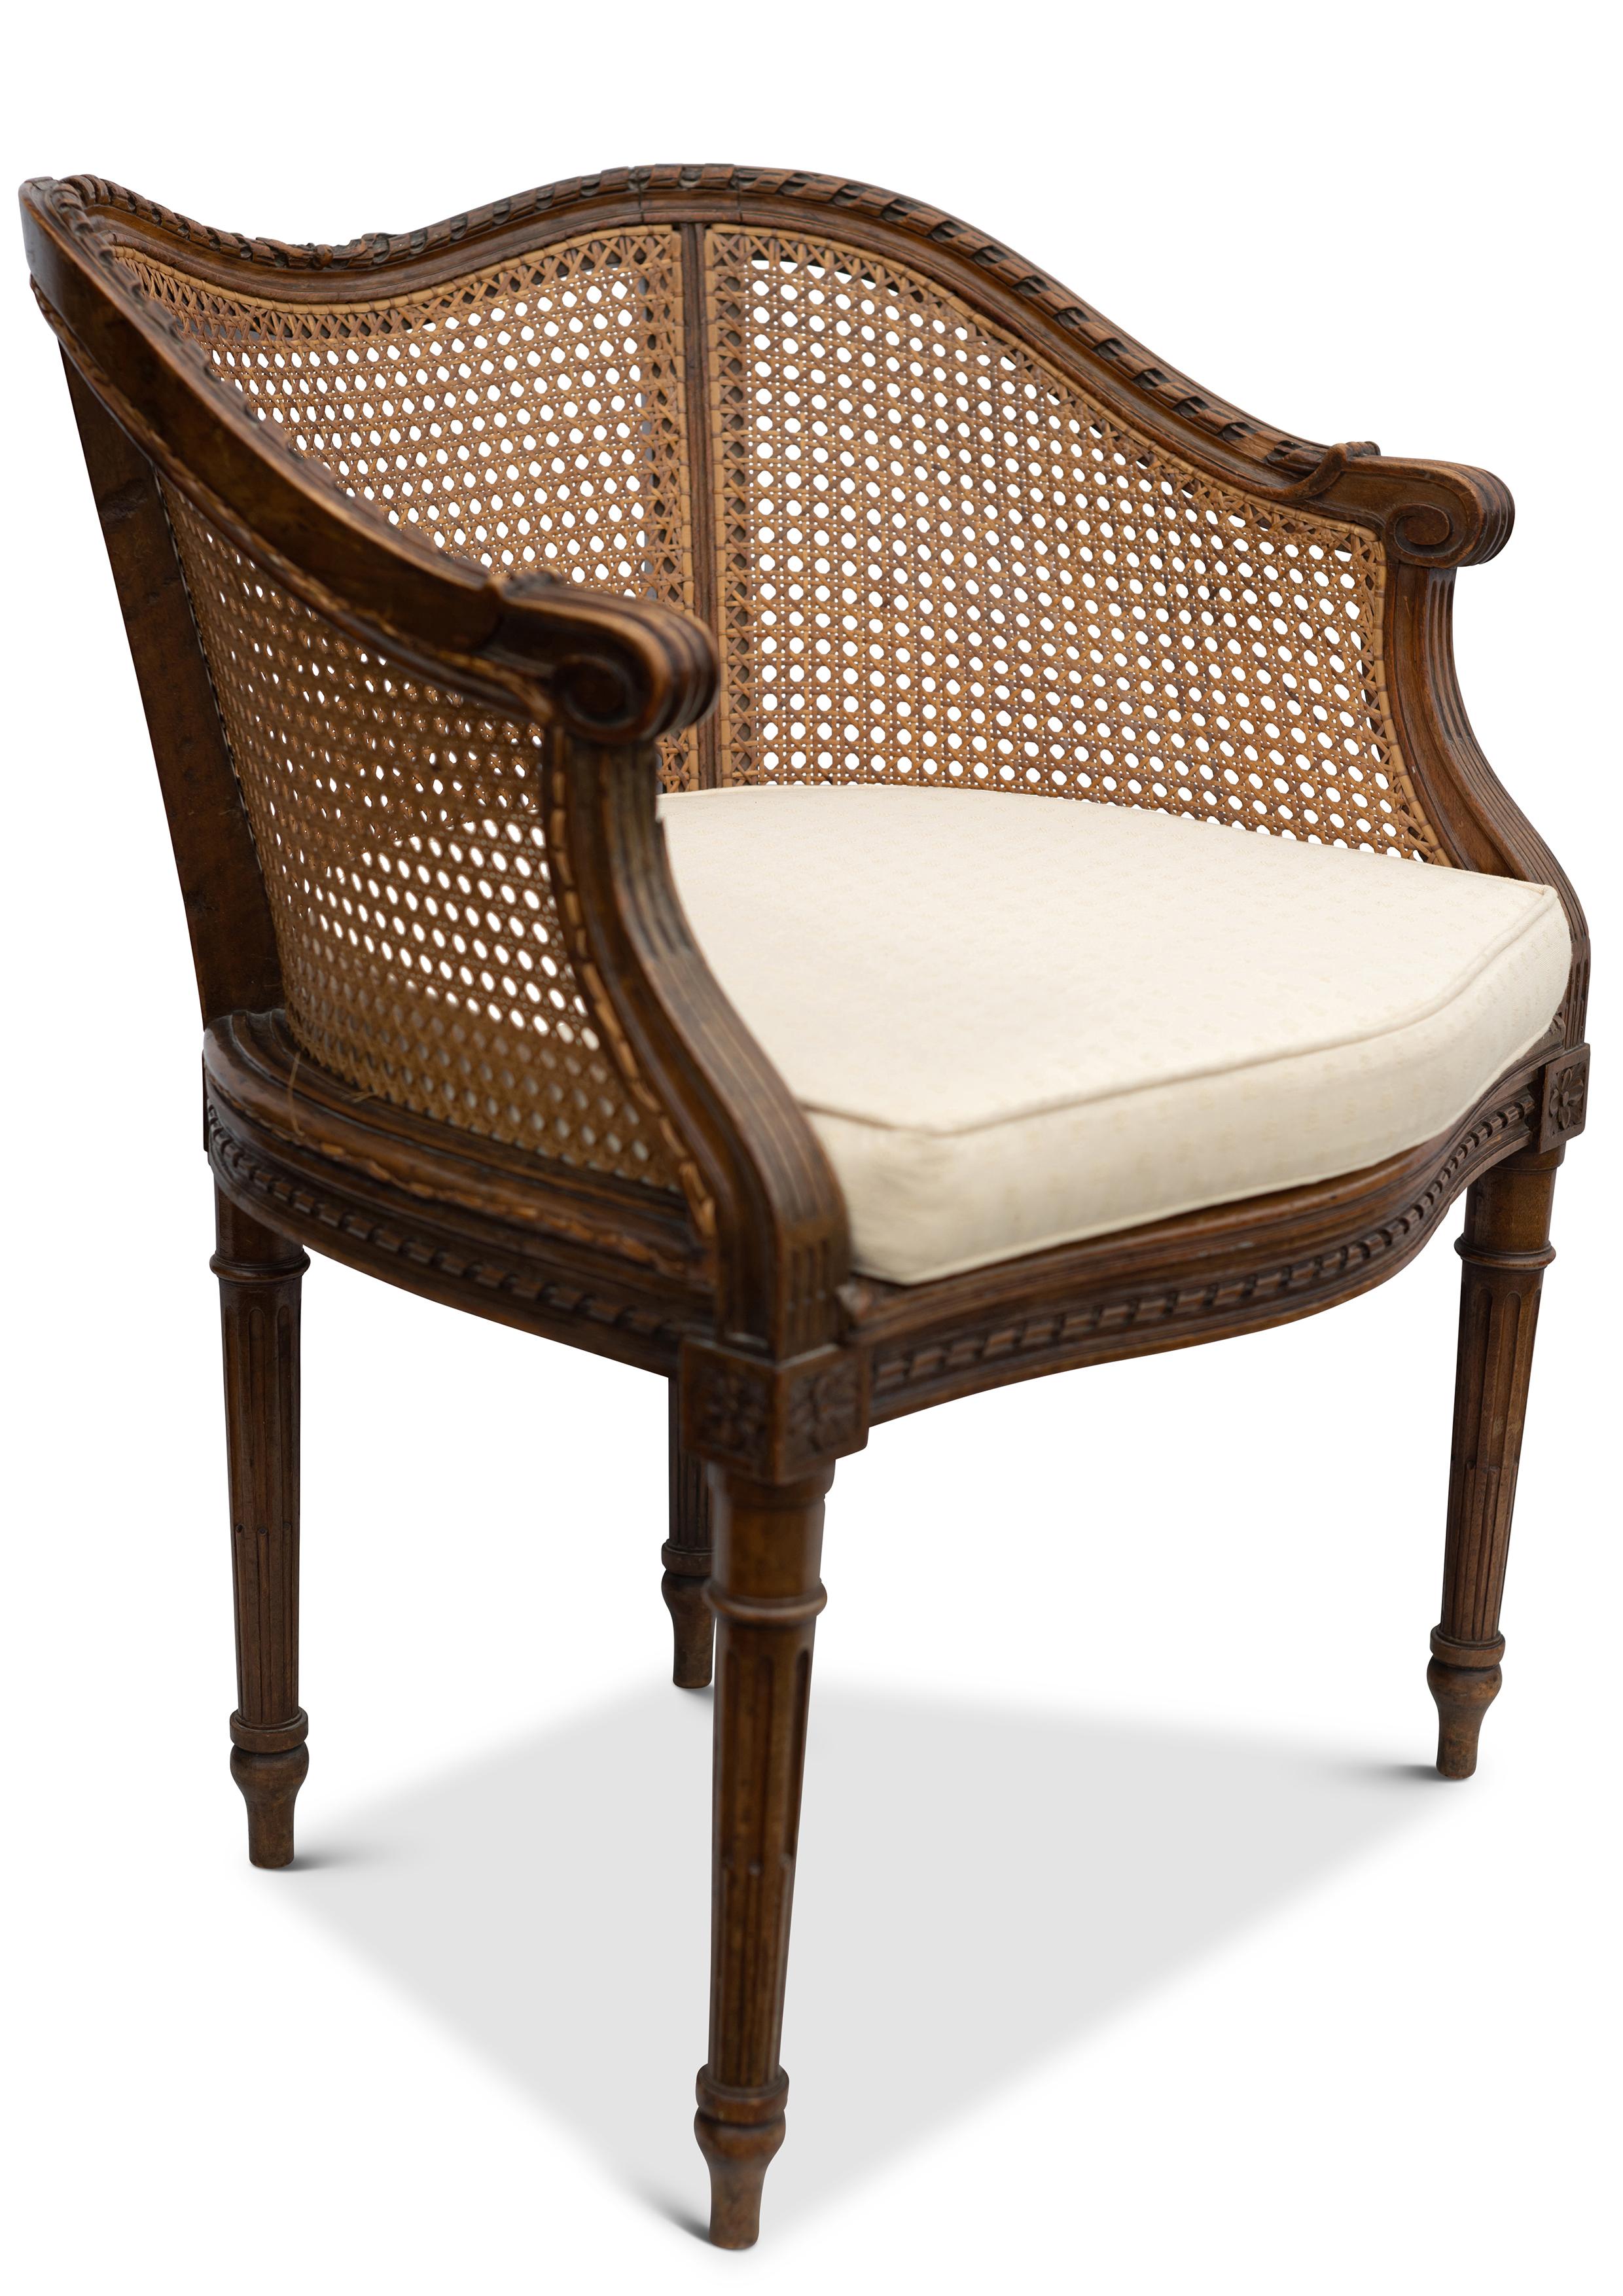 Caning Antique Bergère Beech & Cane Carved Armchair With Cushion & Reeded Legs For Sale